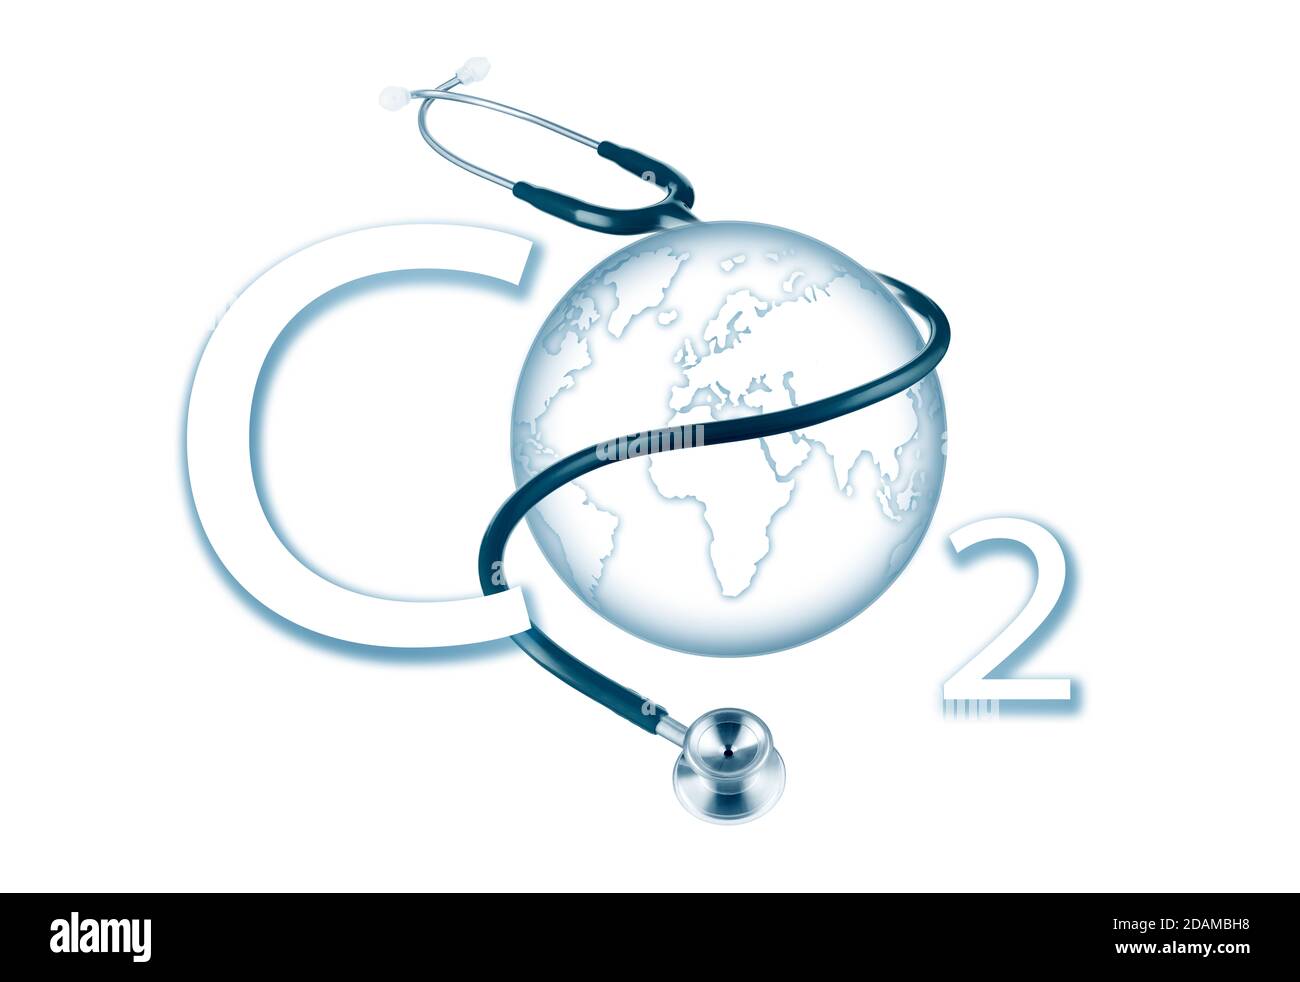 Carbon dioxide with Earth and stethoscope, illustration. Stock Photo